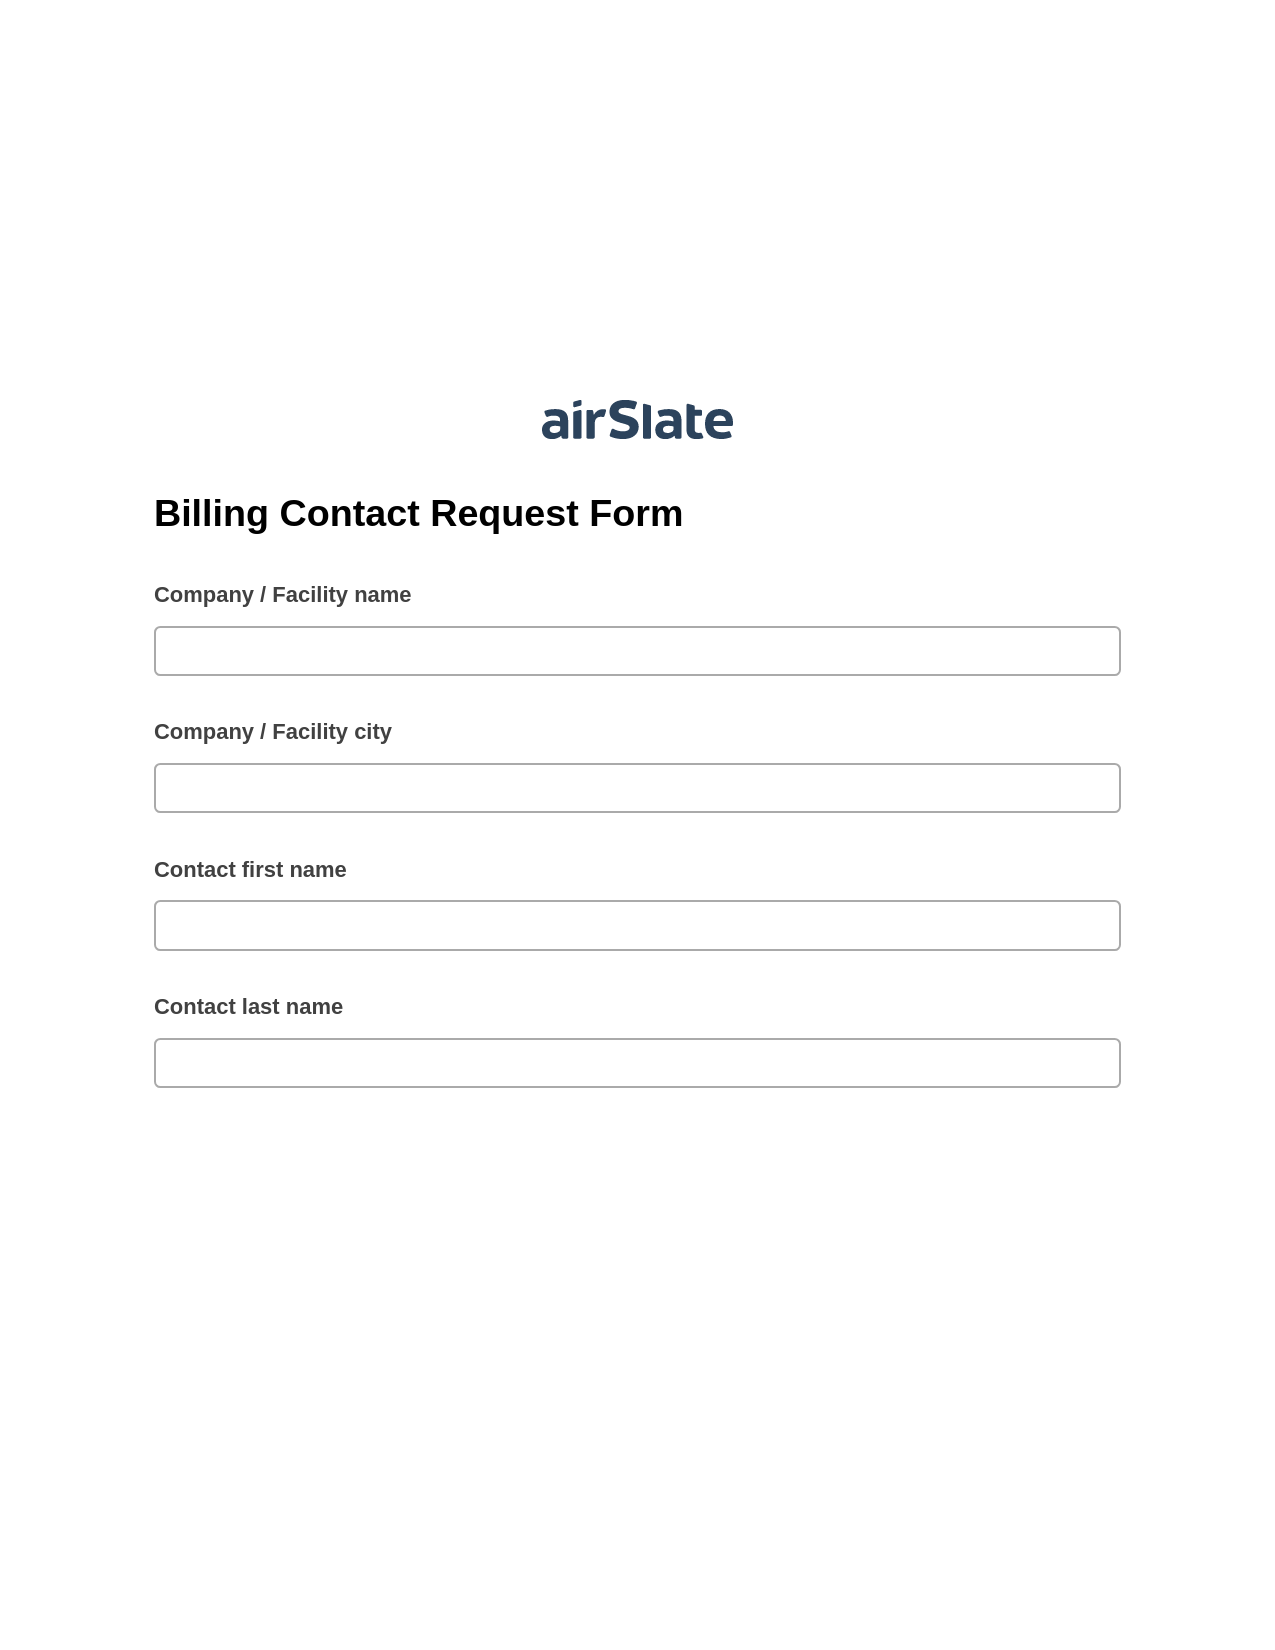 Multirole Billing Contact Request Form Pre-fill Dropdowns from Google Sheet Bot, Set Signature Type Bot, Export to Smartsheet